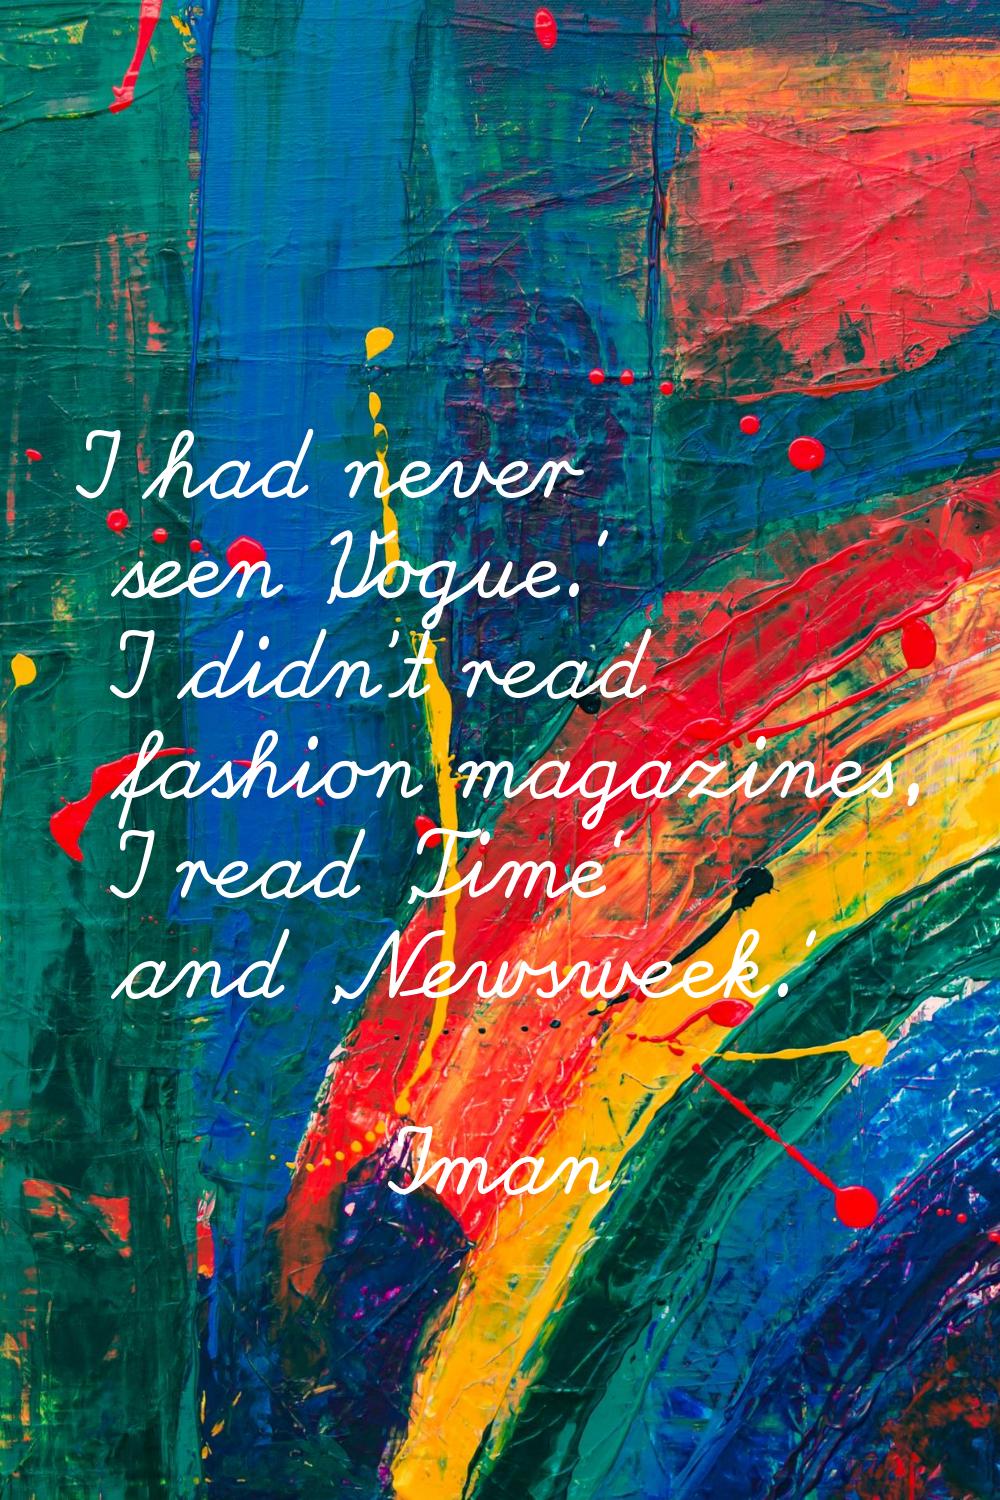 I had never seen 'Vogue.' I didn't read fashion magazines, I read 'Time' and 'Newsweek.'